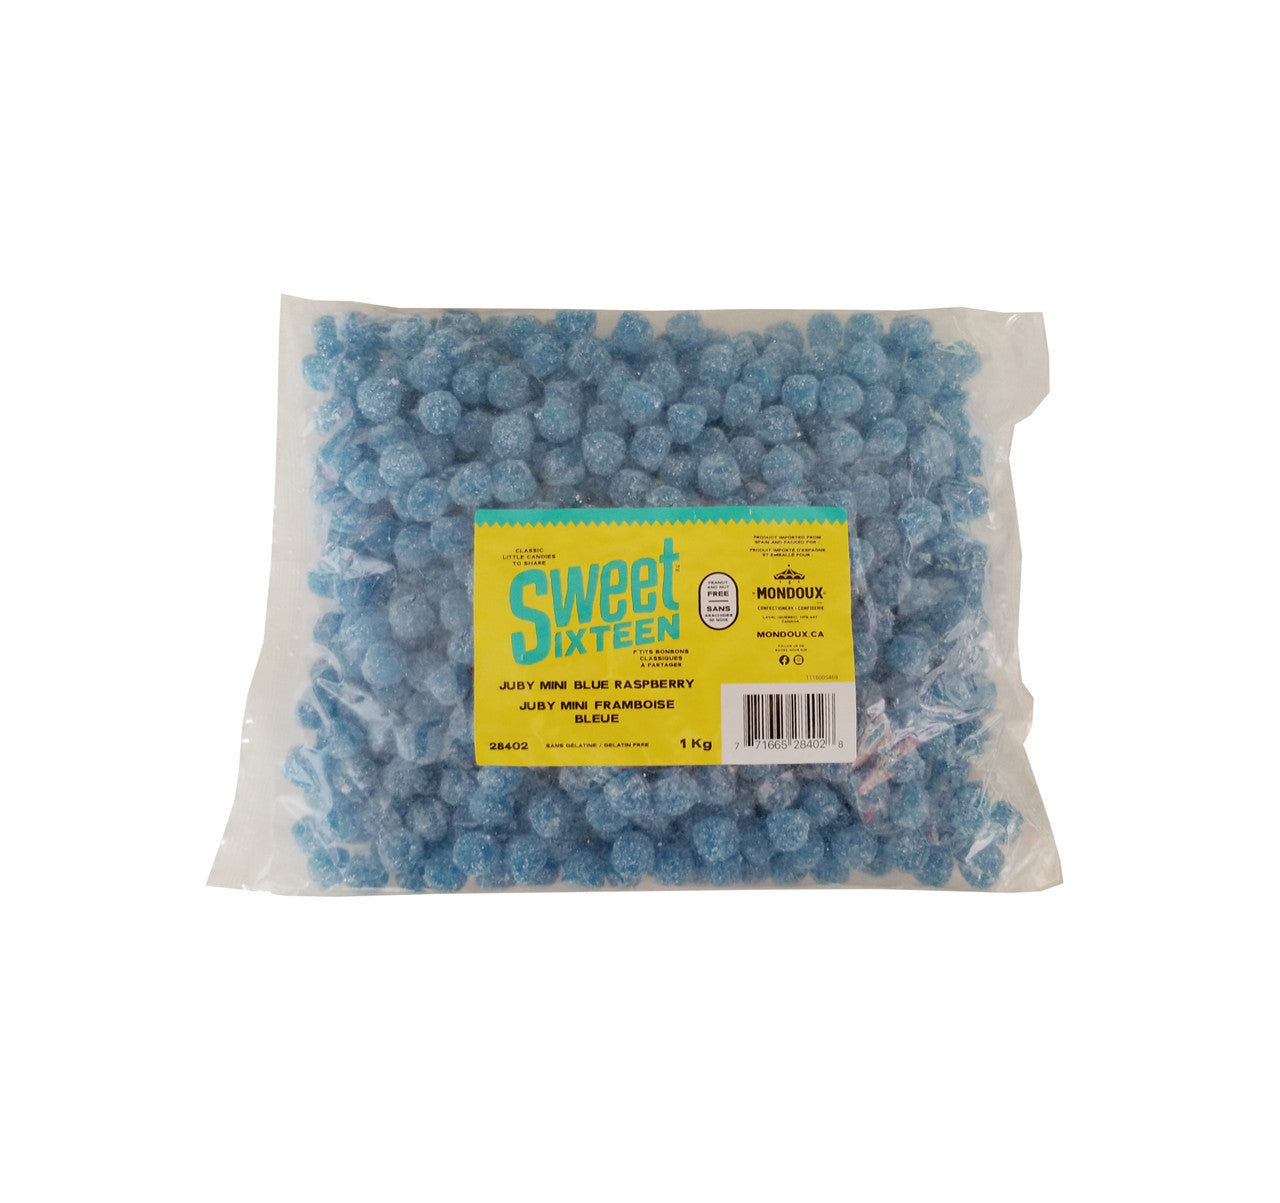 Mondoux Sweet Sixteen Juby Mini Blue Raspberry, 1kg/2.2 lbs., {Imported from Canada}